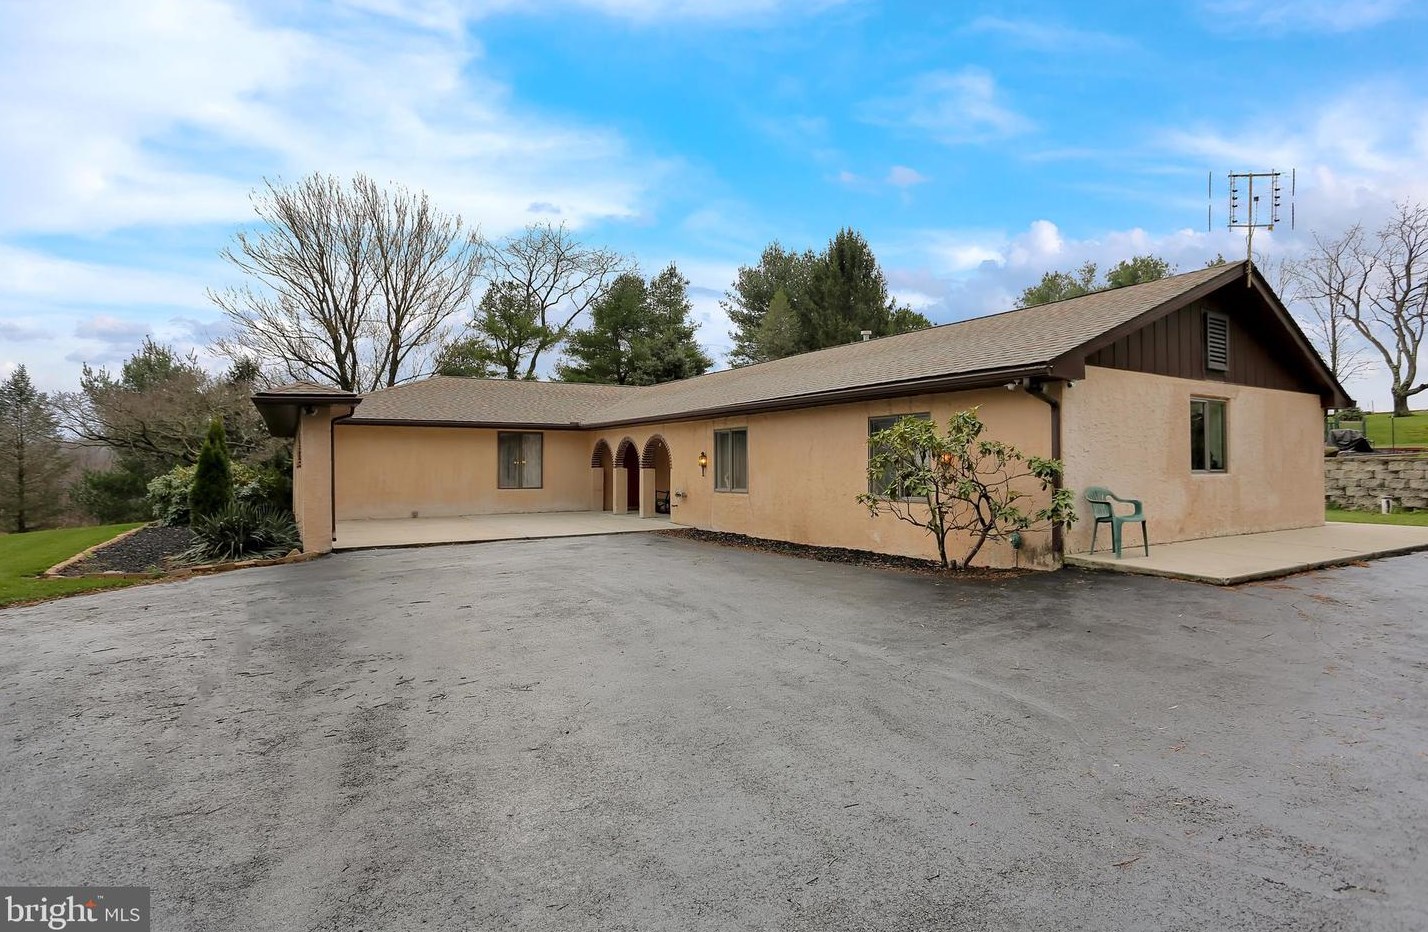 3088 Seisholtzville Rd, Macungie, PA 18062